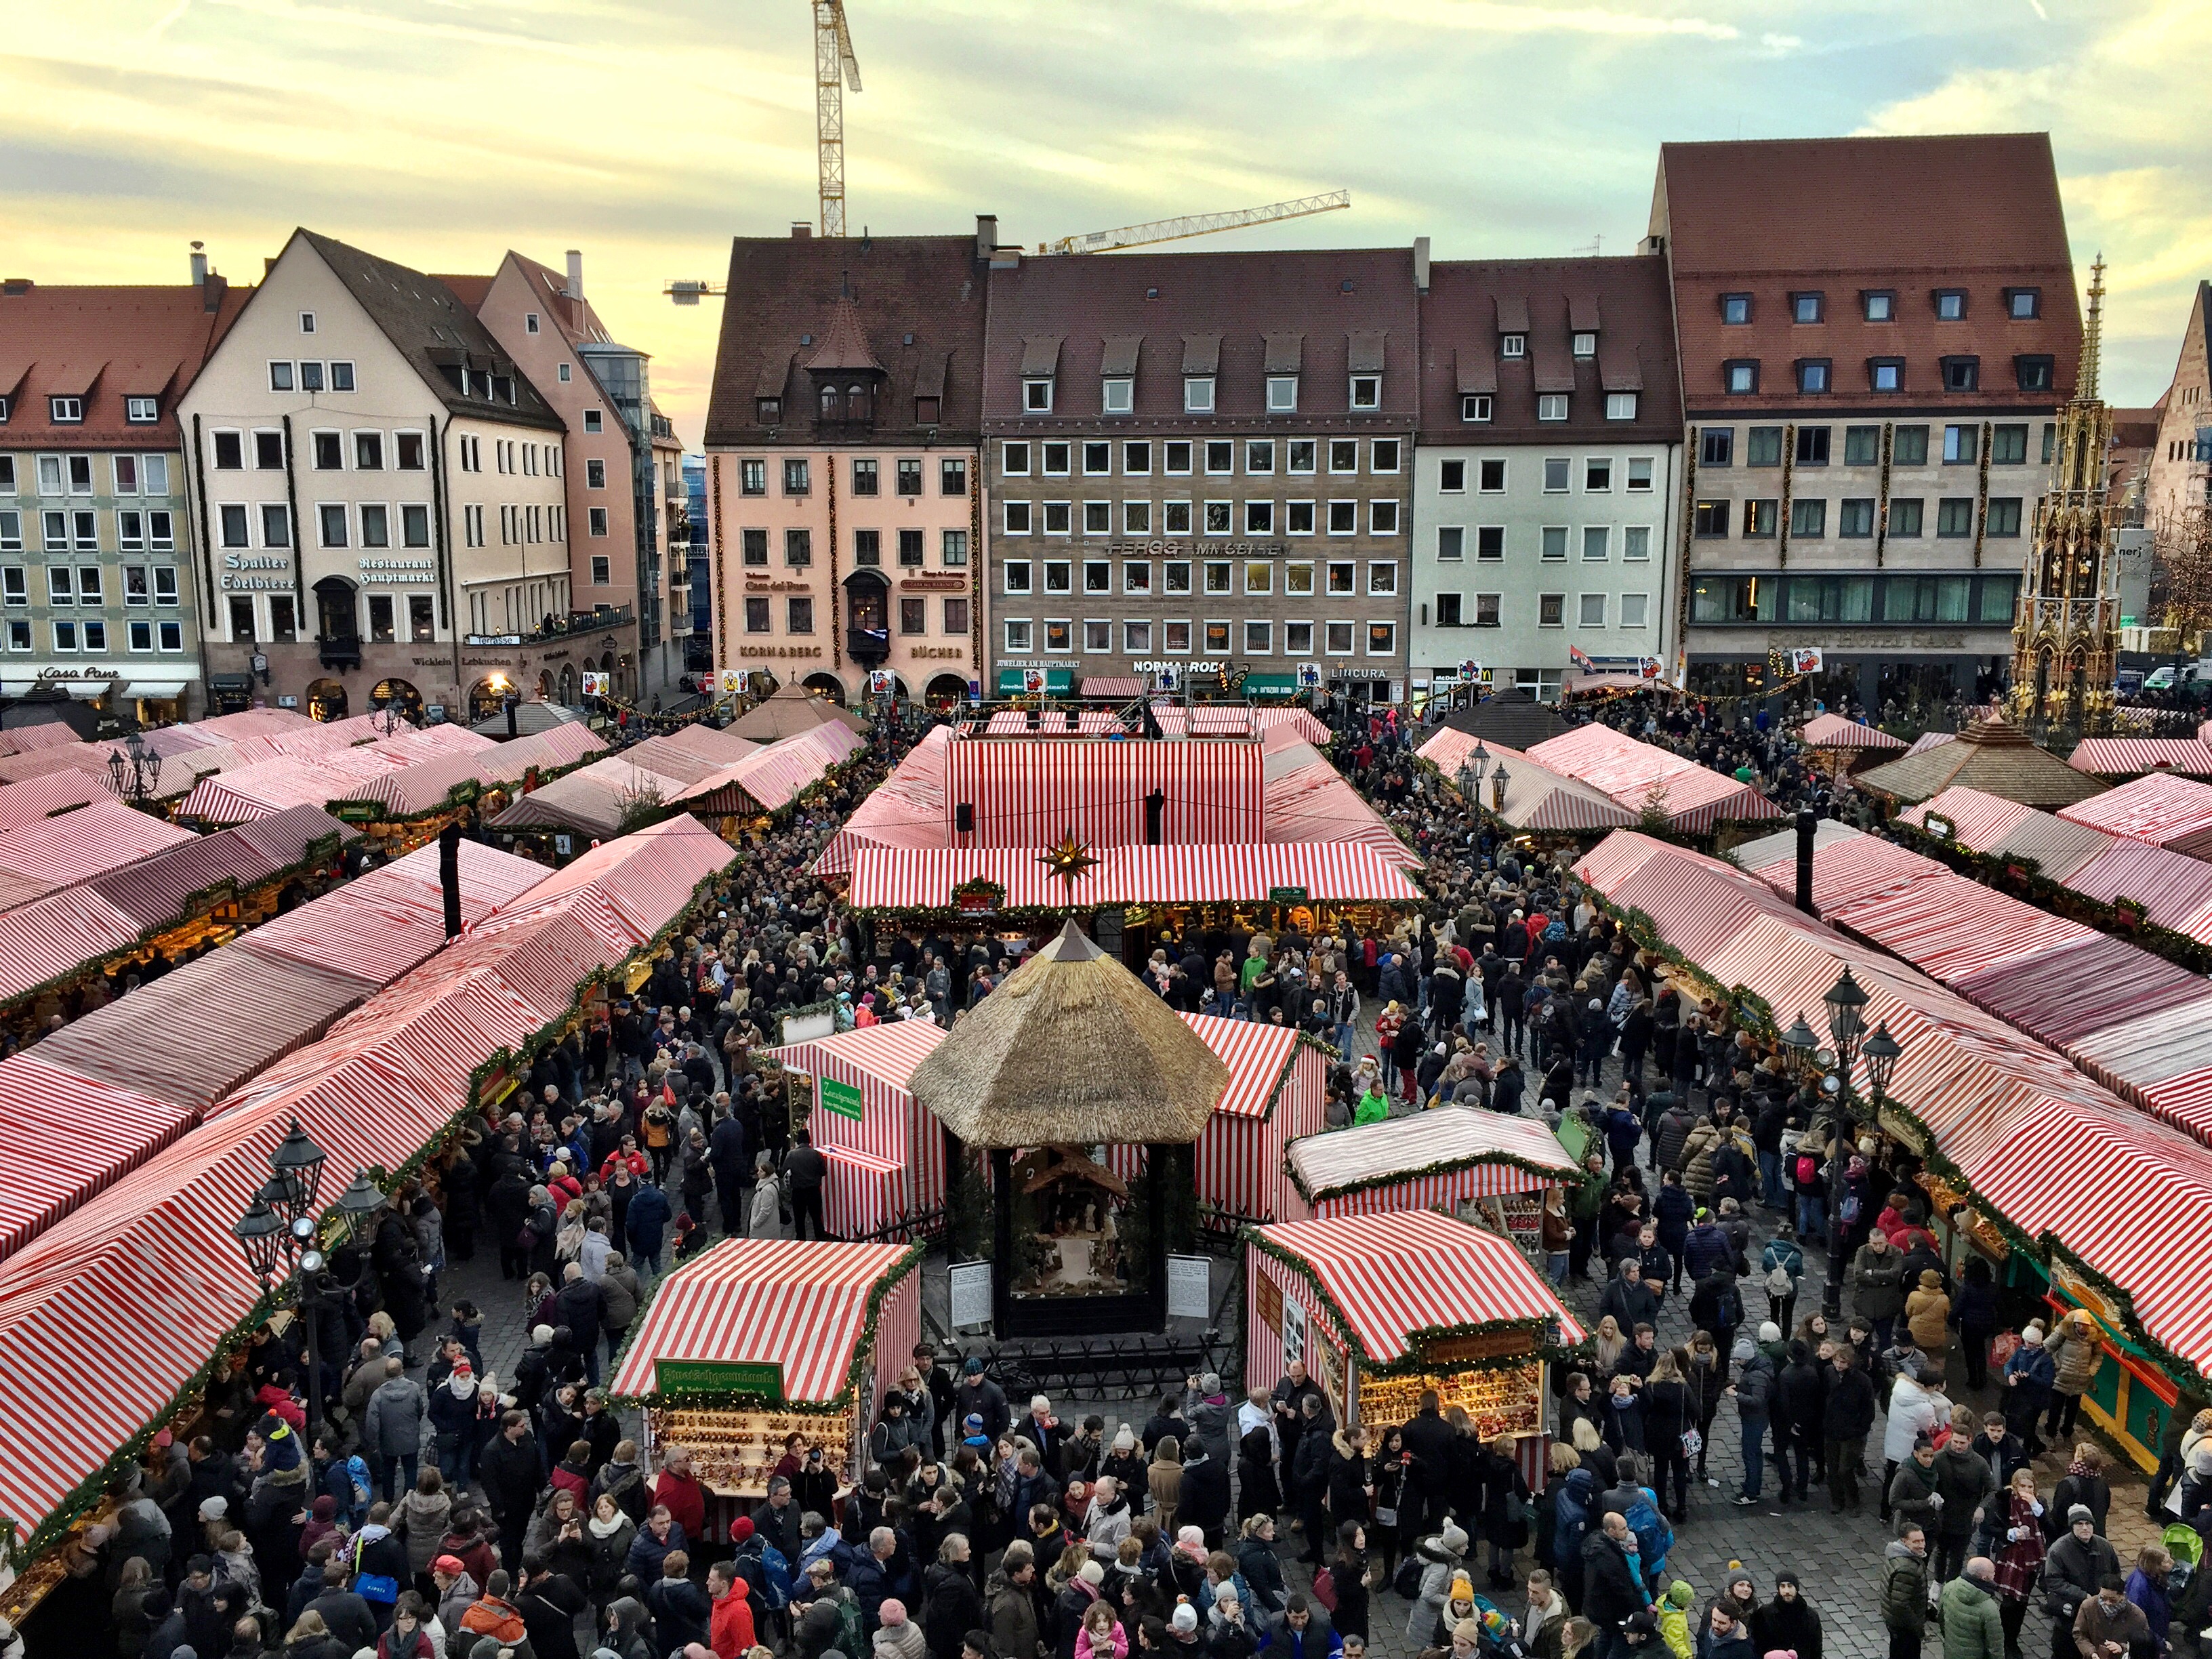 Is December a good time to visit Germany? The answer is yes. View from Cathedral balcony overlooking the Nuremberg Christmas market tents and crowds